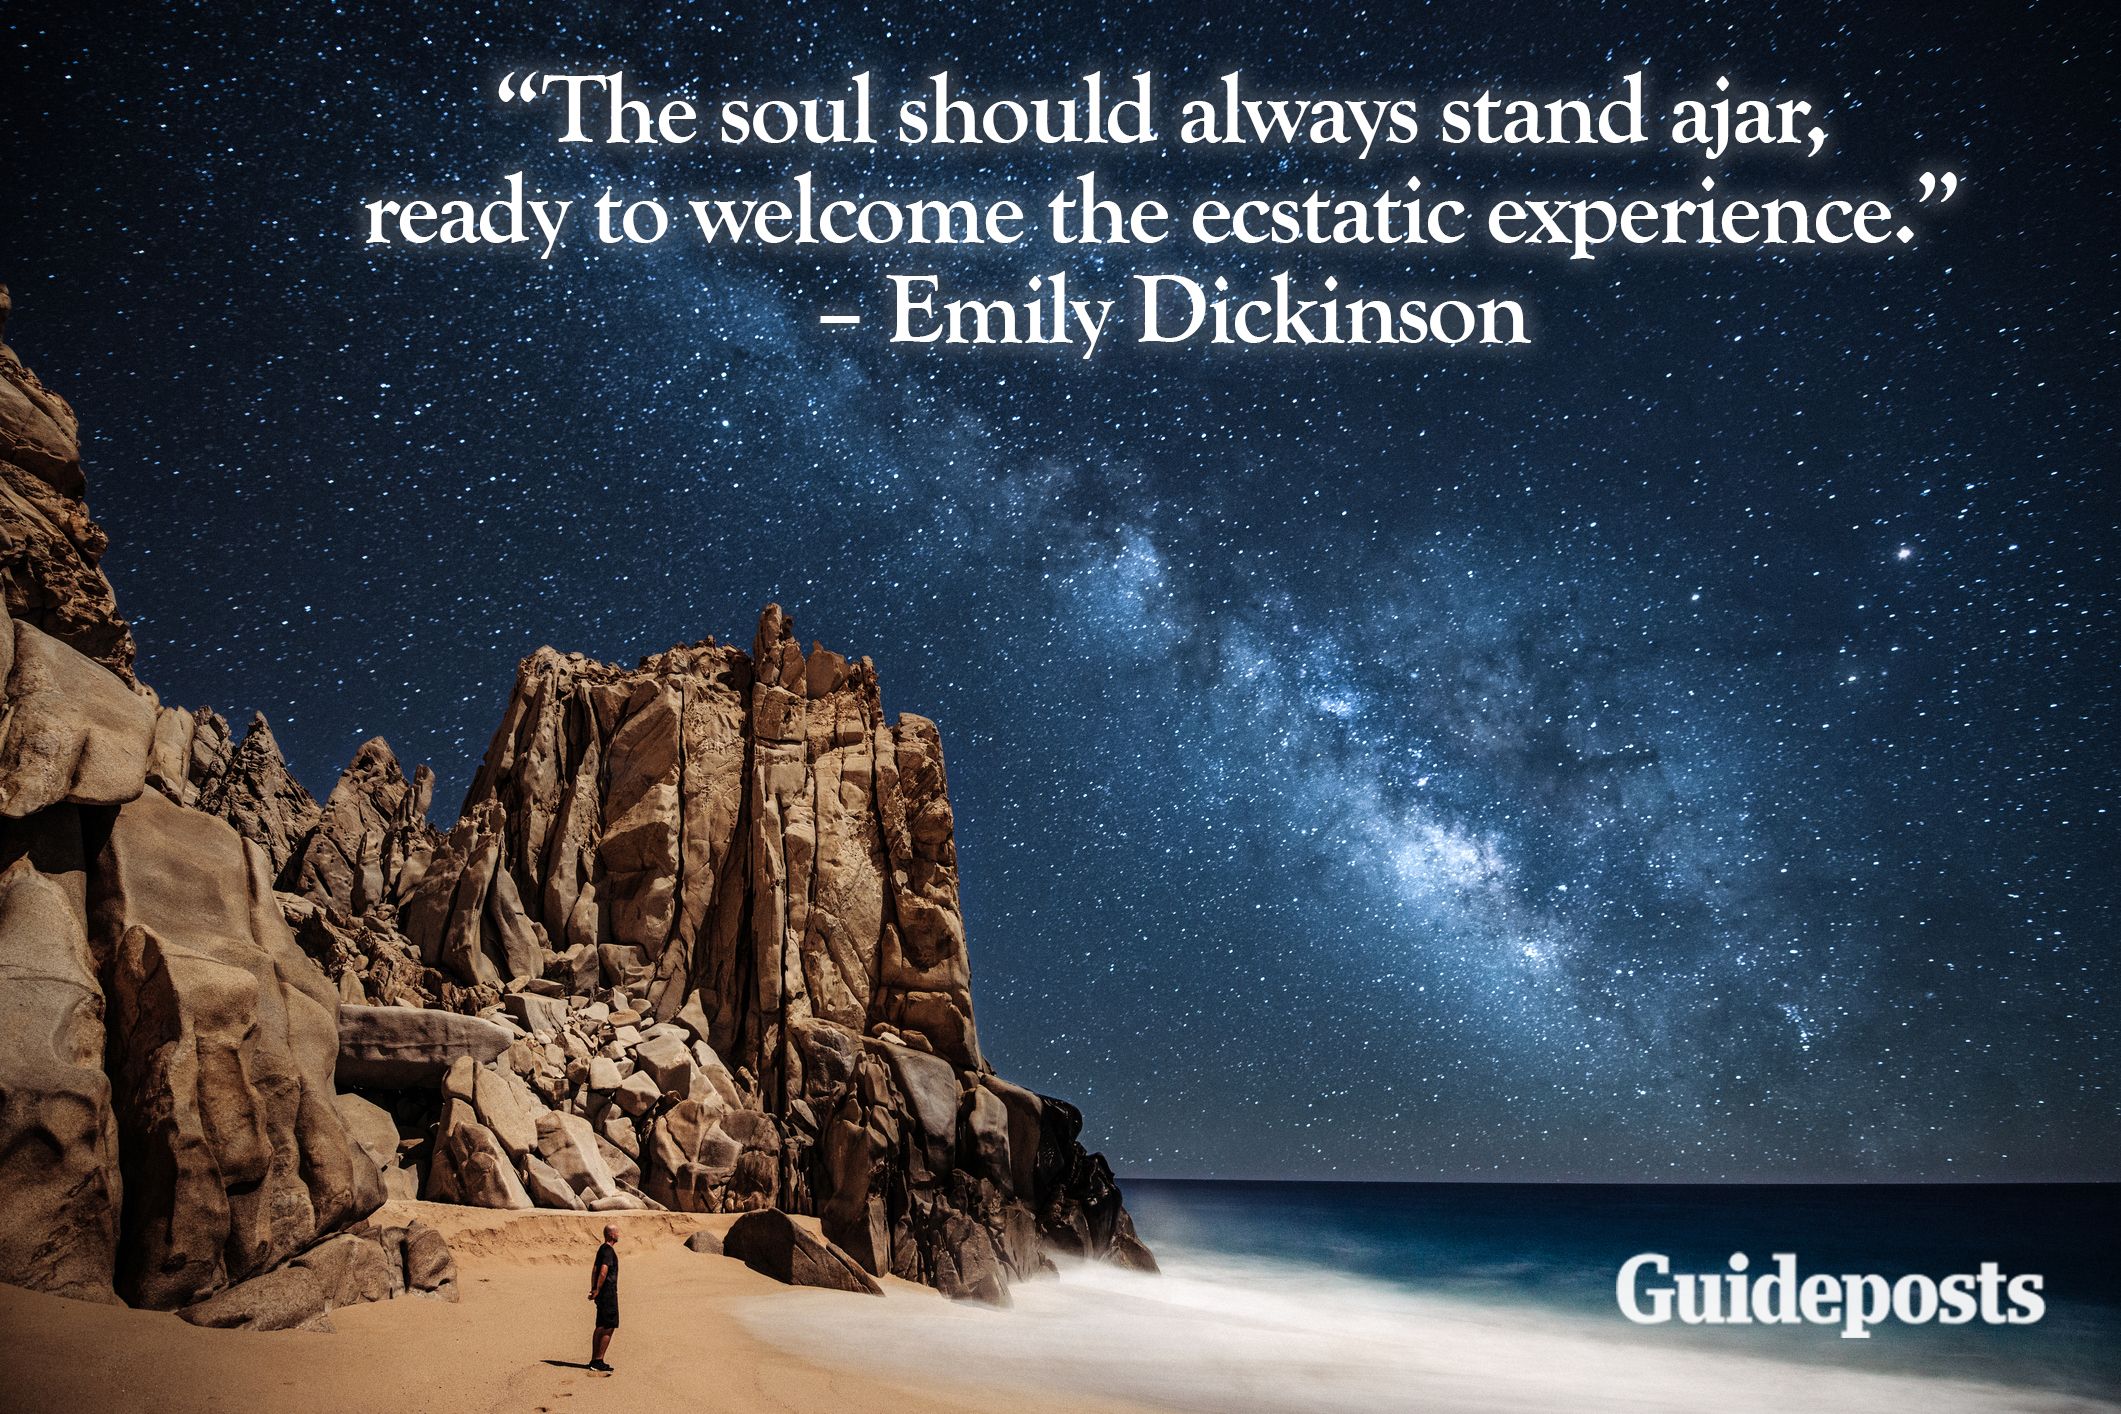 Emily Dickinson Creativity quote better living life advice finding life purpose